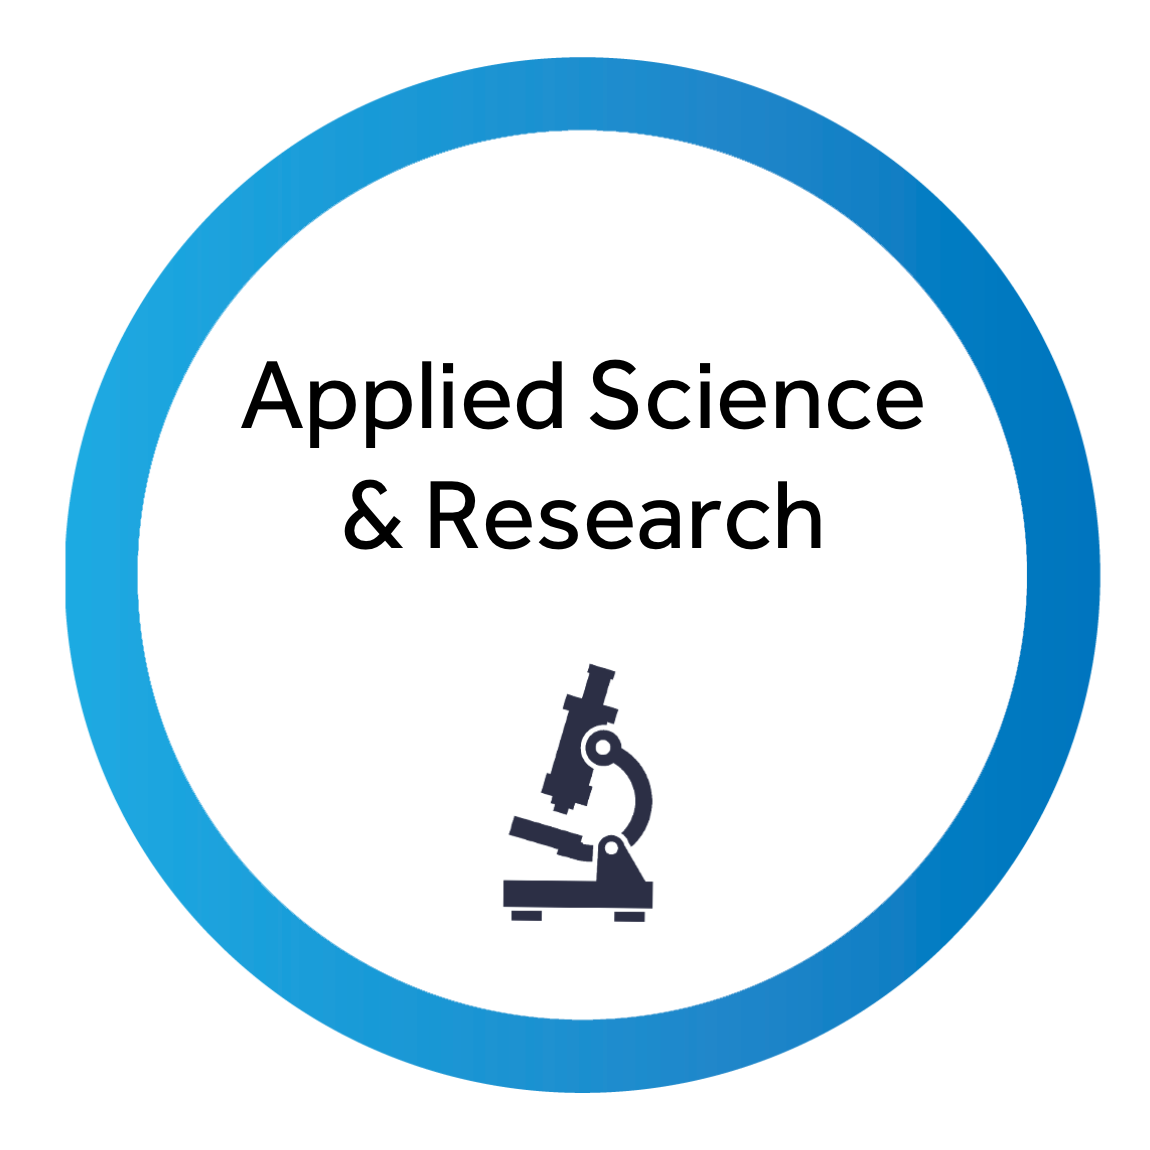 Applied Science & Research